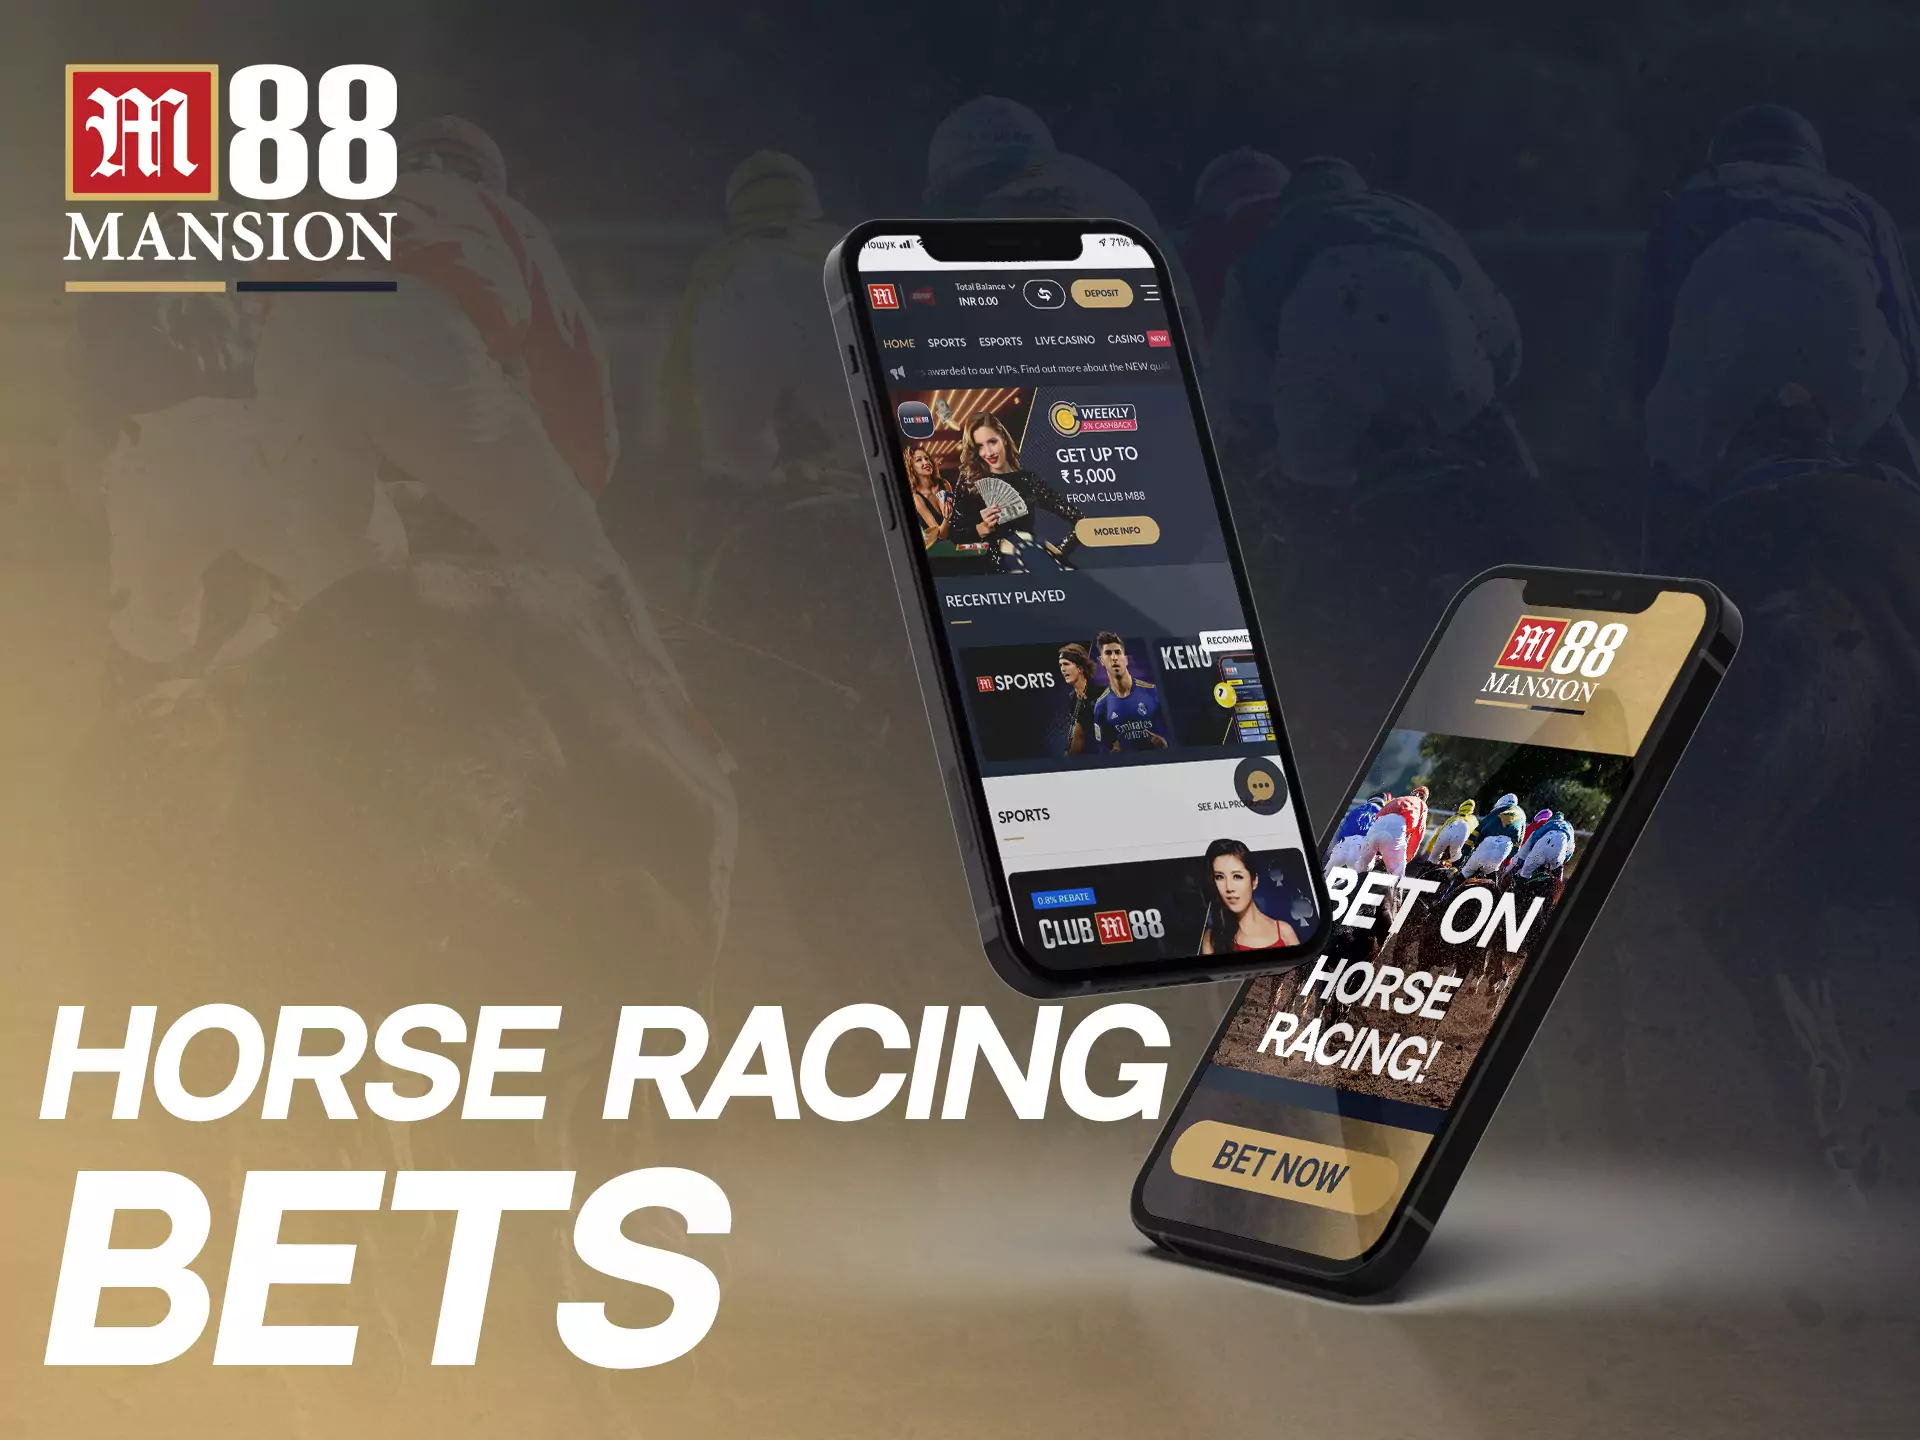 You can bet on horse racing at M88.